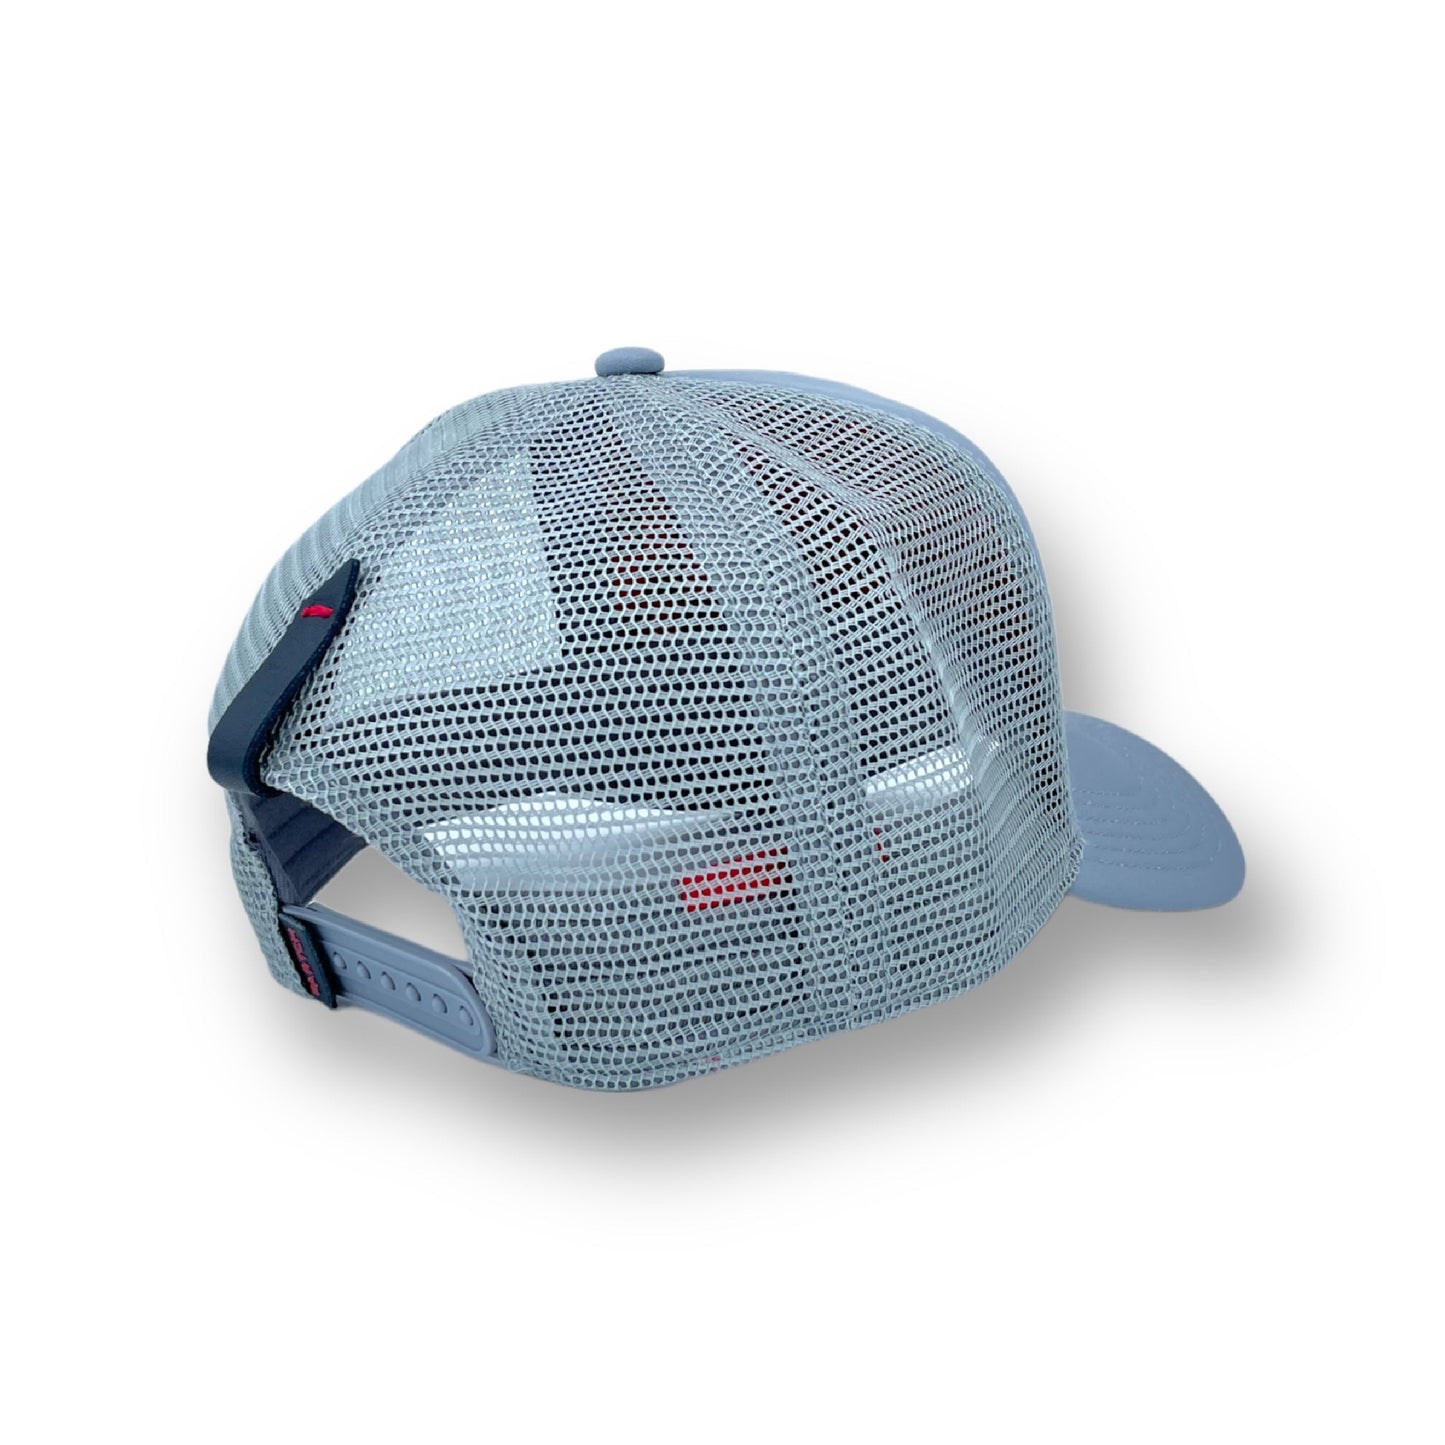 Partch Trucker Hat in Grey with rear Mesh and Leather accents